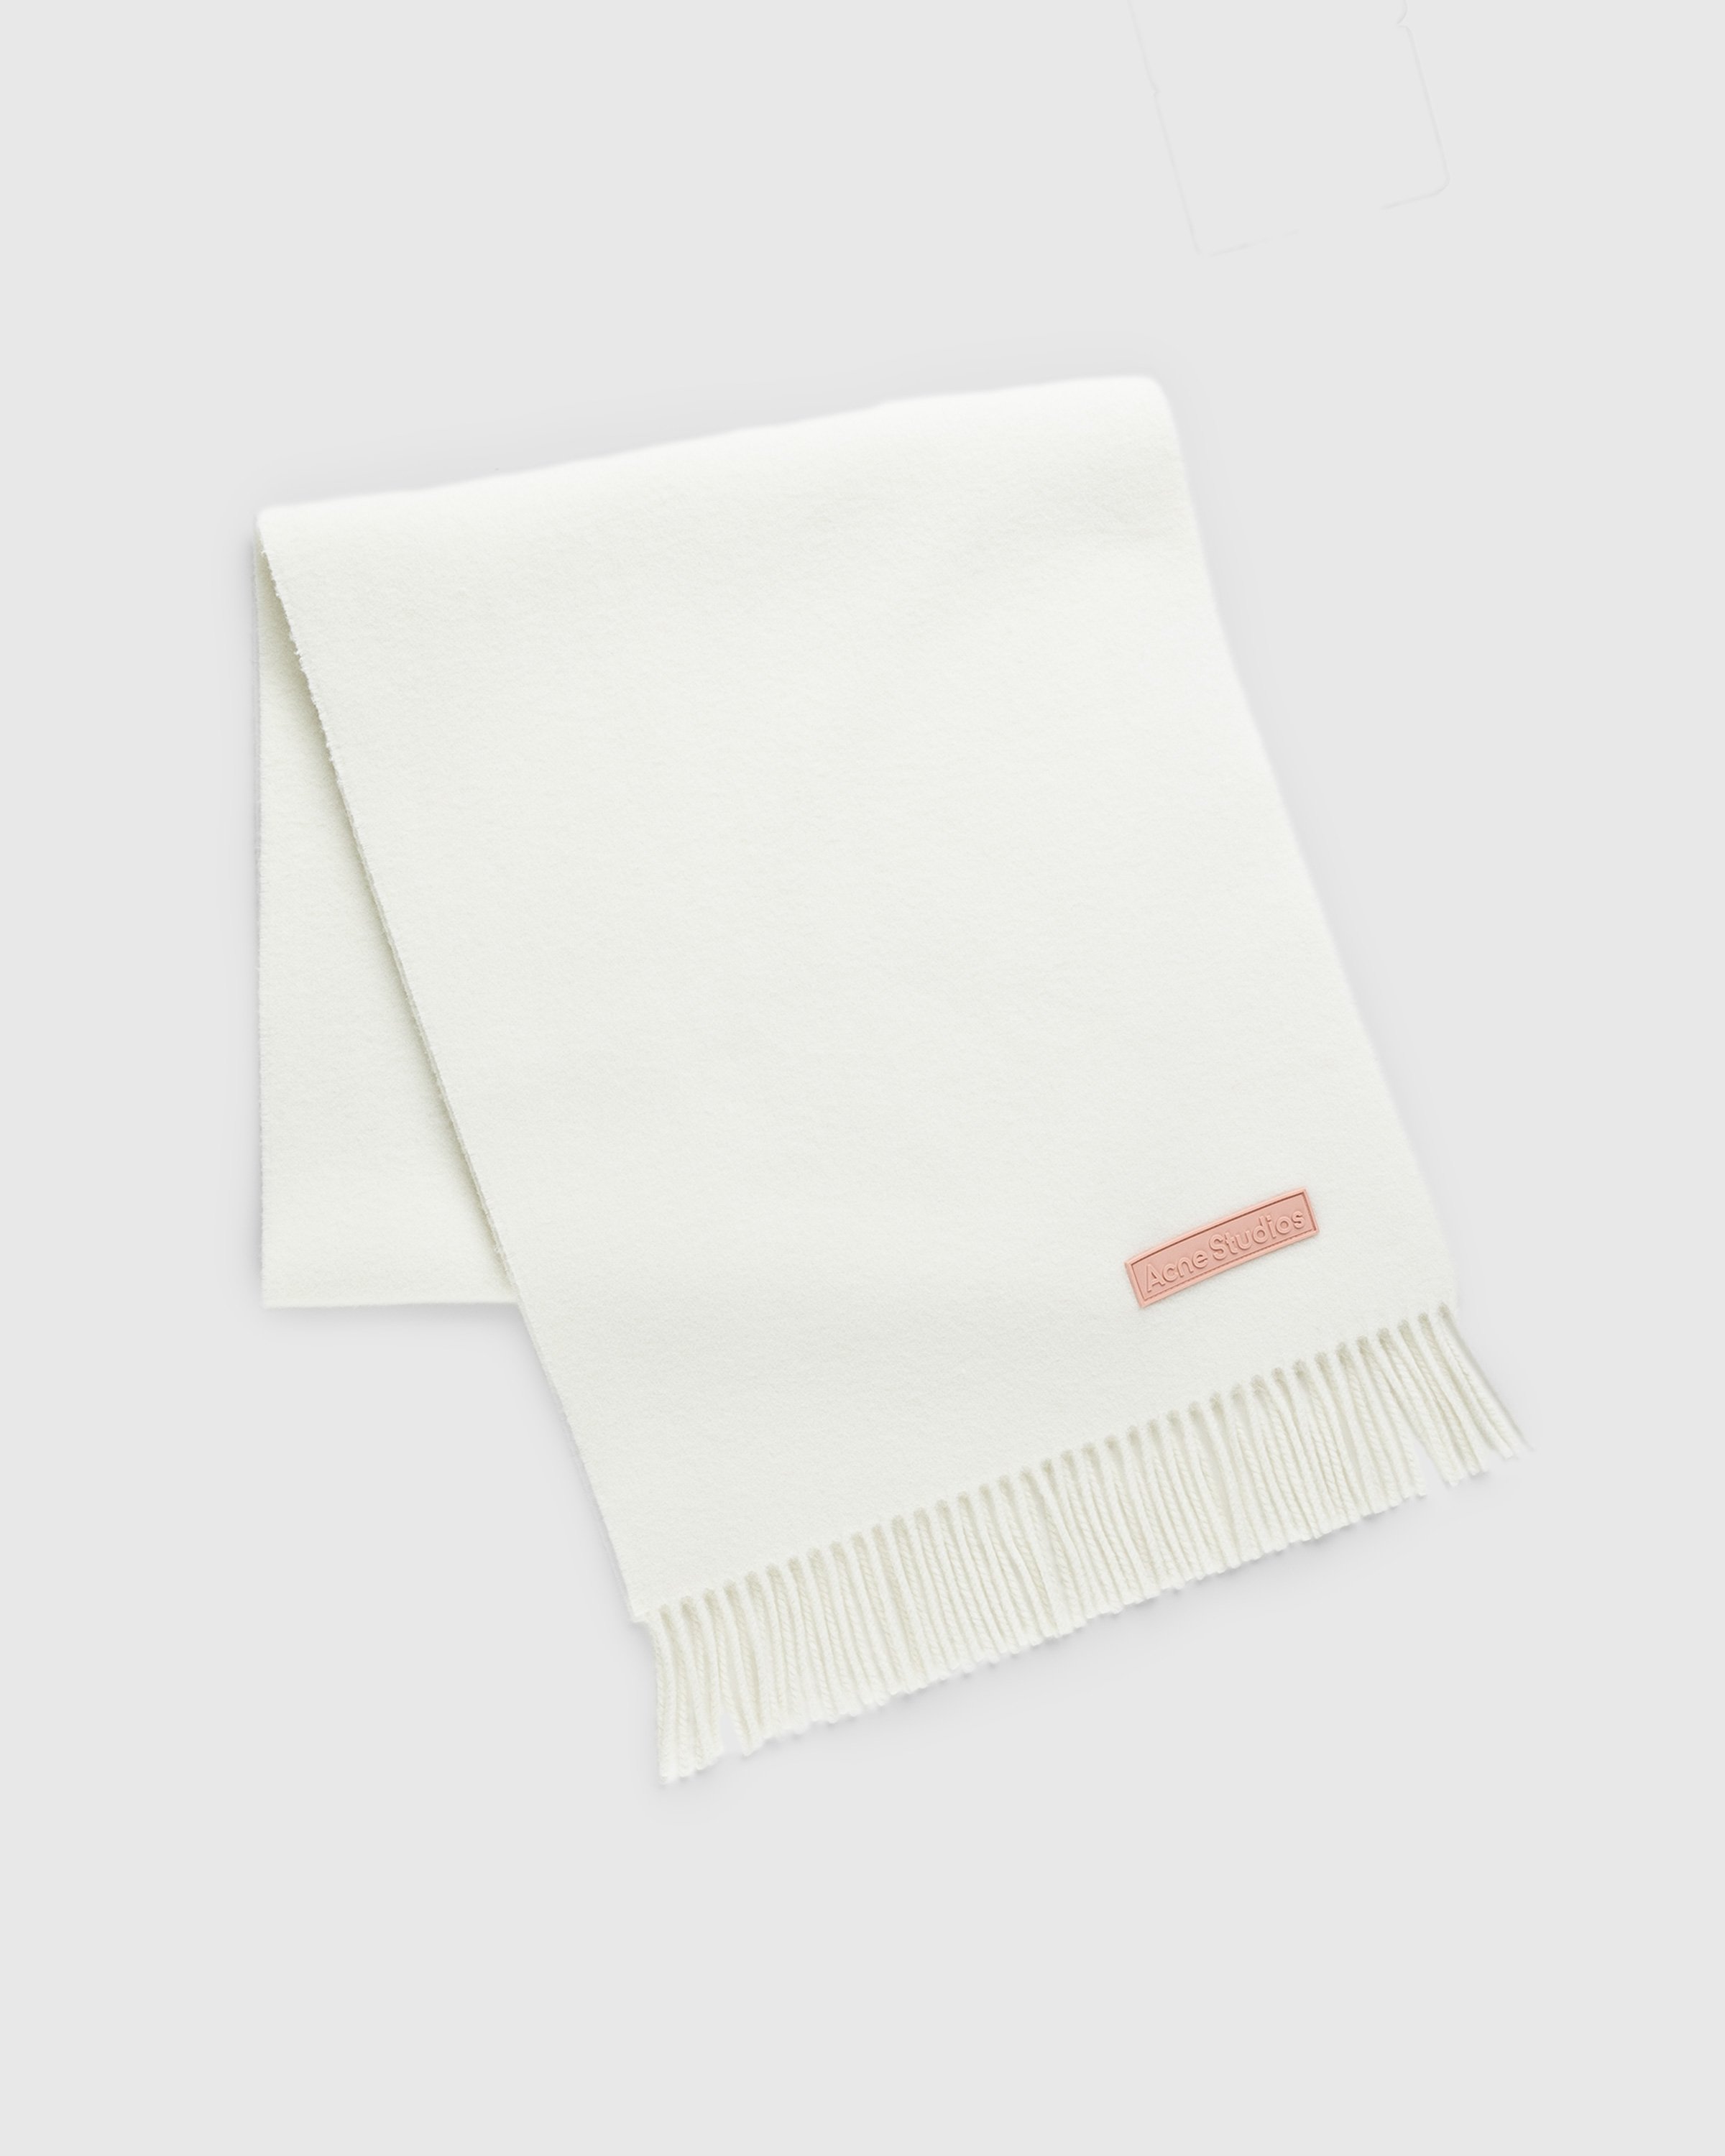 Acne Studios - Rich Wool Fringe Scarf - Accessories - White - Image 2